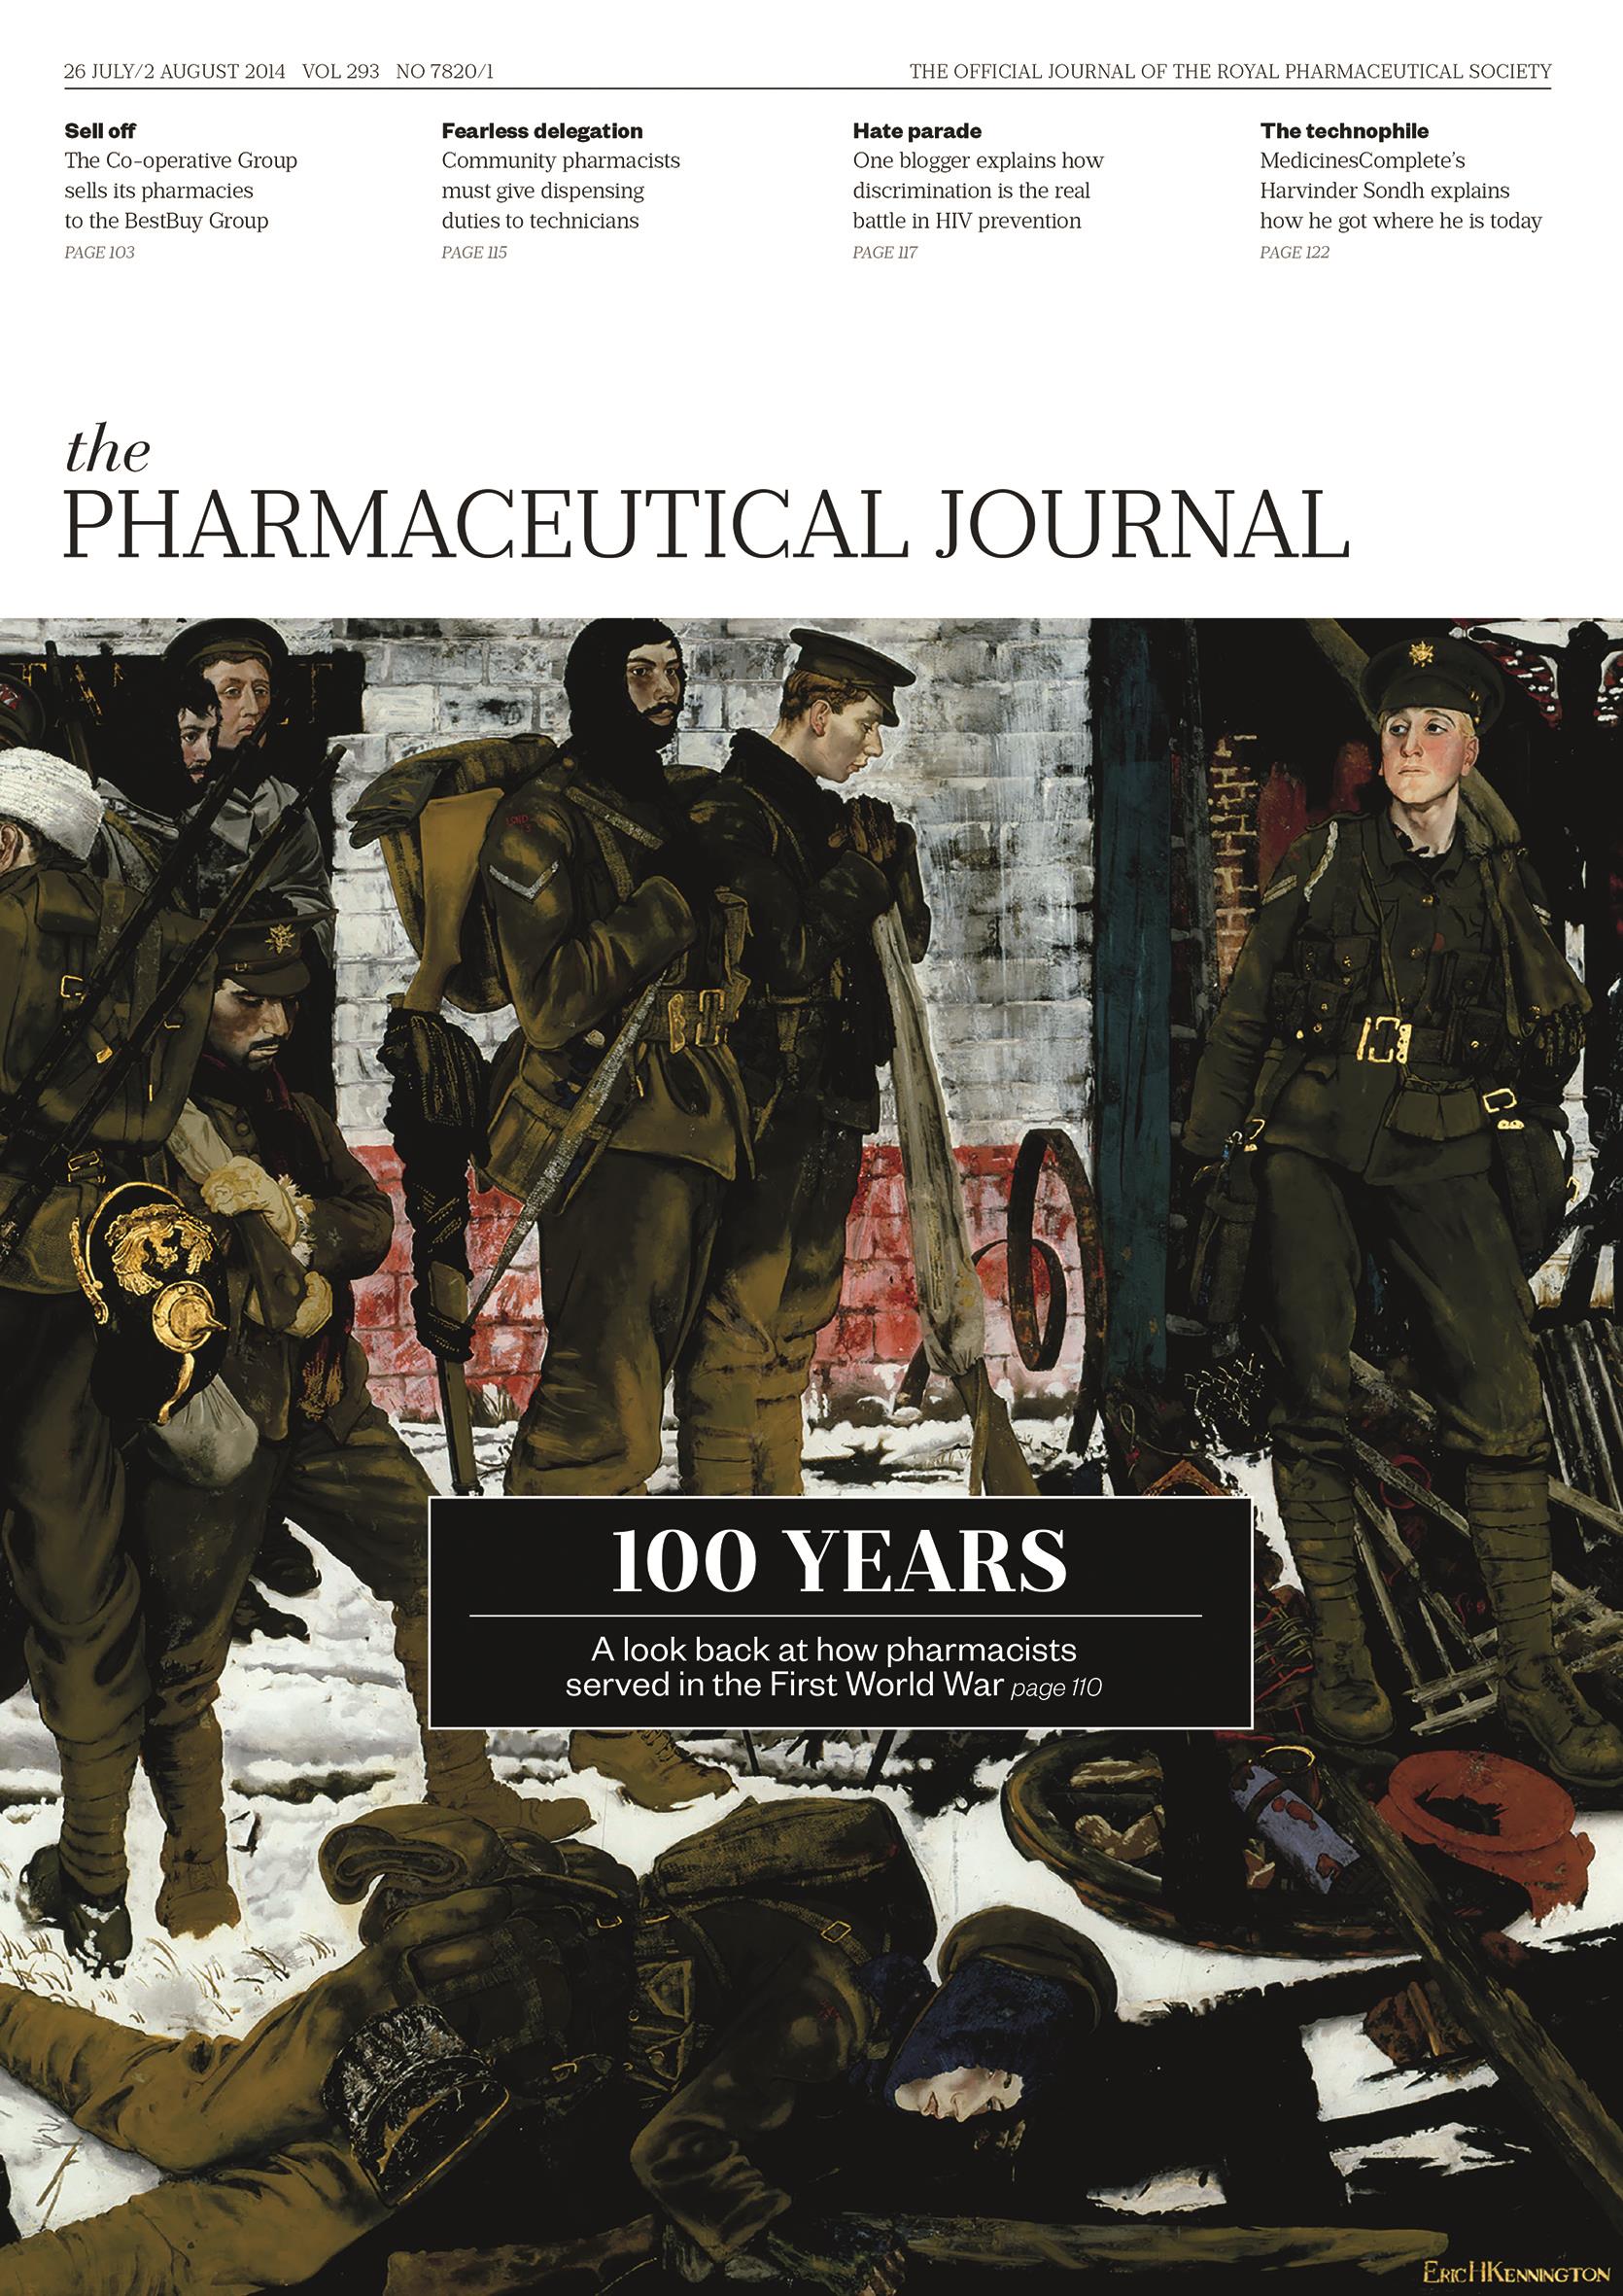 Publication issue cover for PJ, 26 July/2 August 2014, Vol 293, No 7820/1